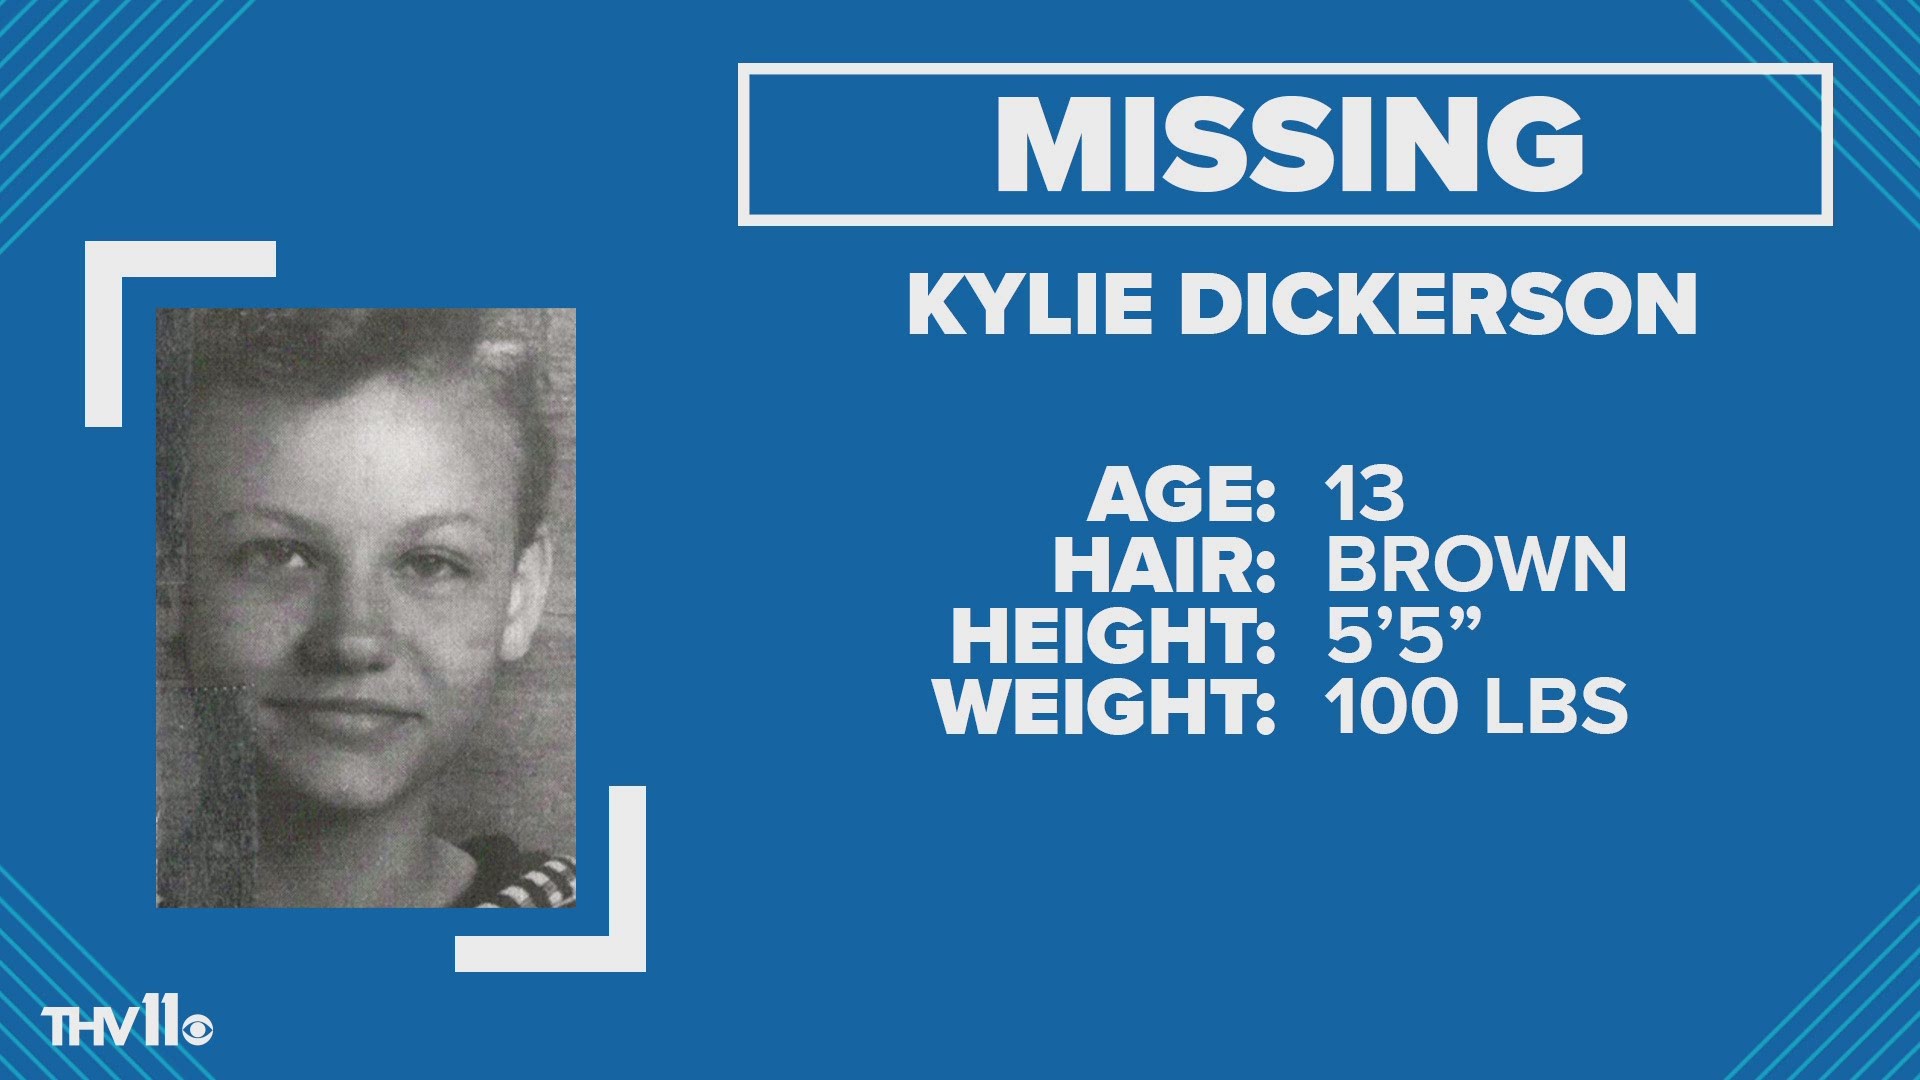 Sherwood police have issued a missing/endangered child advisory for 13-year-old Kylie Dickerson.